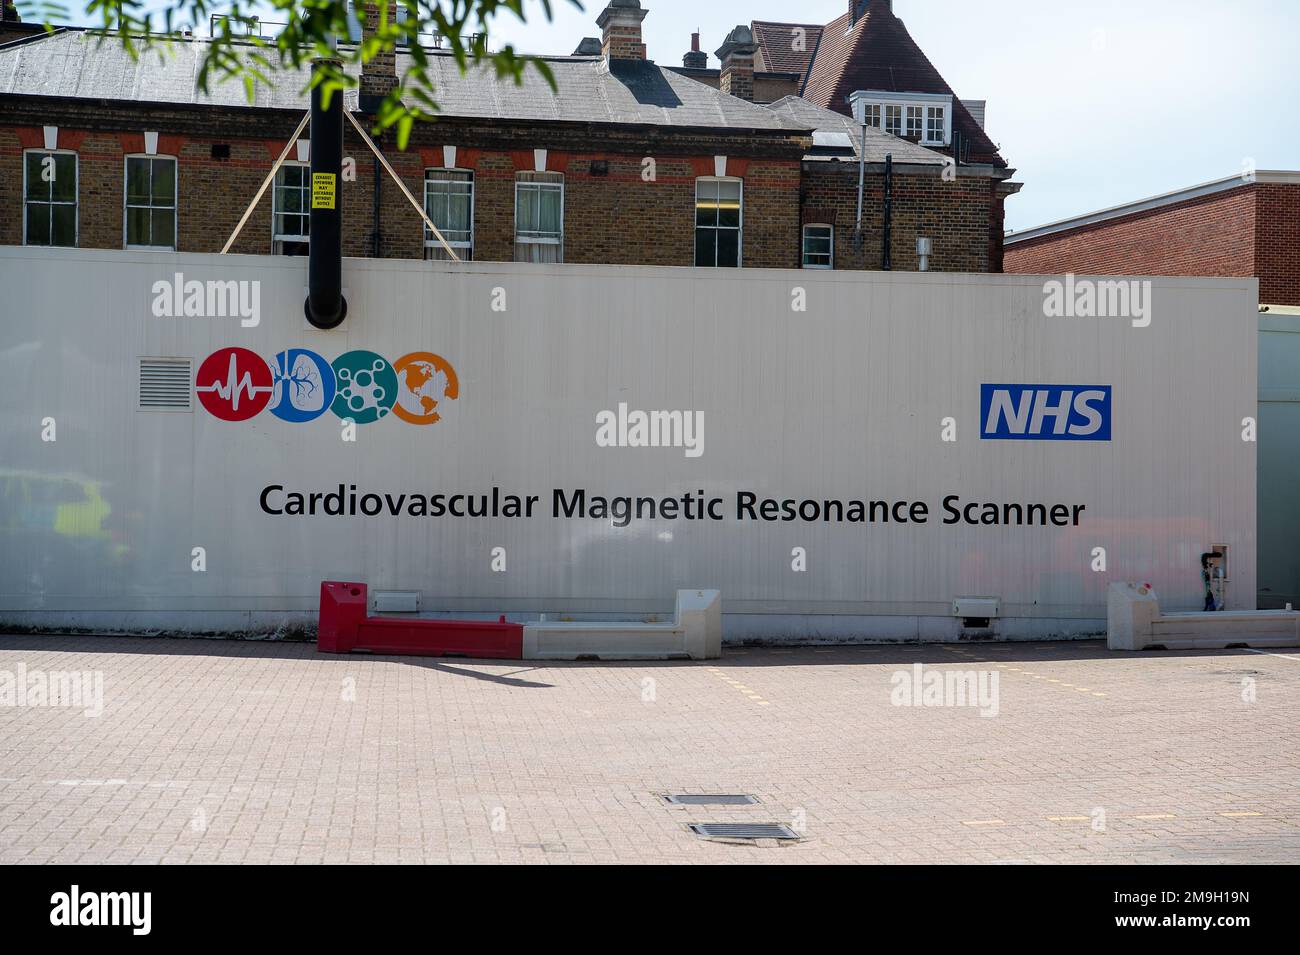 Chelsea, London, UK. 16th June, 2022. The Cardiovascular Magnetic Resonance Scanner at the Brompton Hospital in Chelsea. Patients go for heart scans called CMRIs if they have conditions such as Hypertrophic Cardiomyopathy in scanner. Credit: Maureen McLean/Alamy Stock Photo